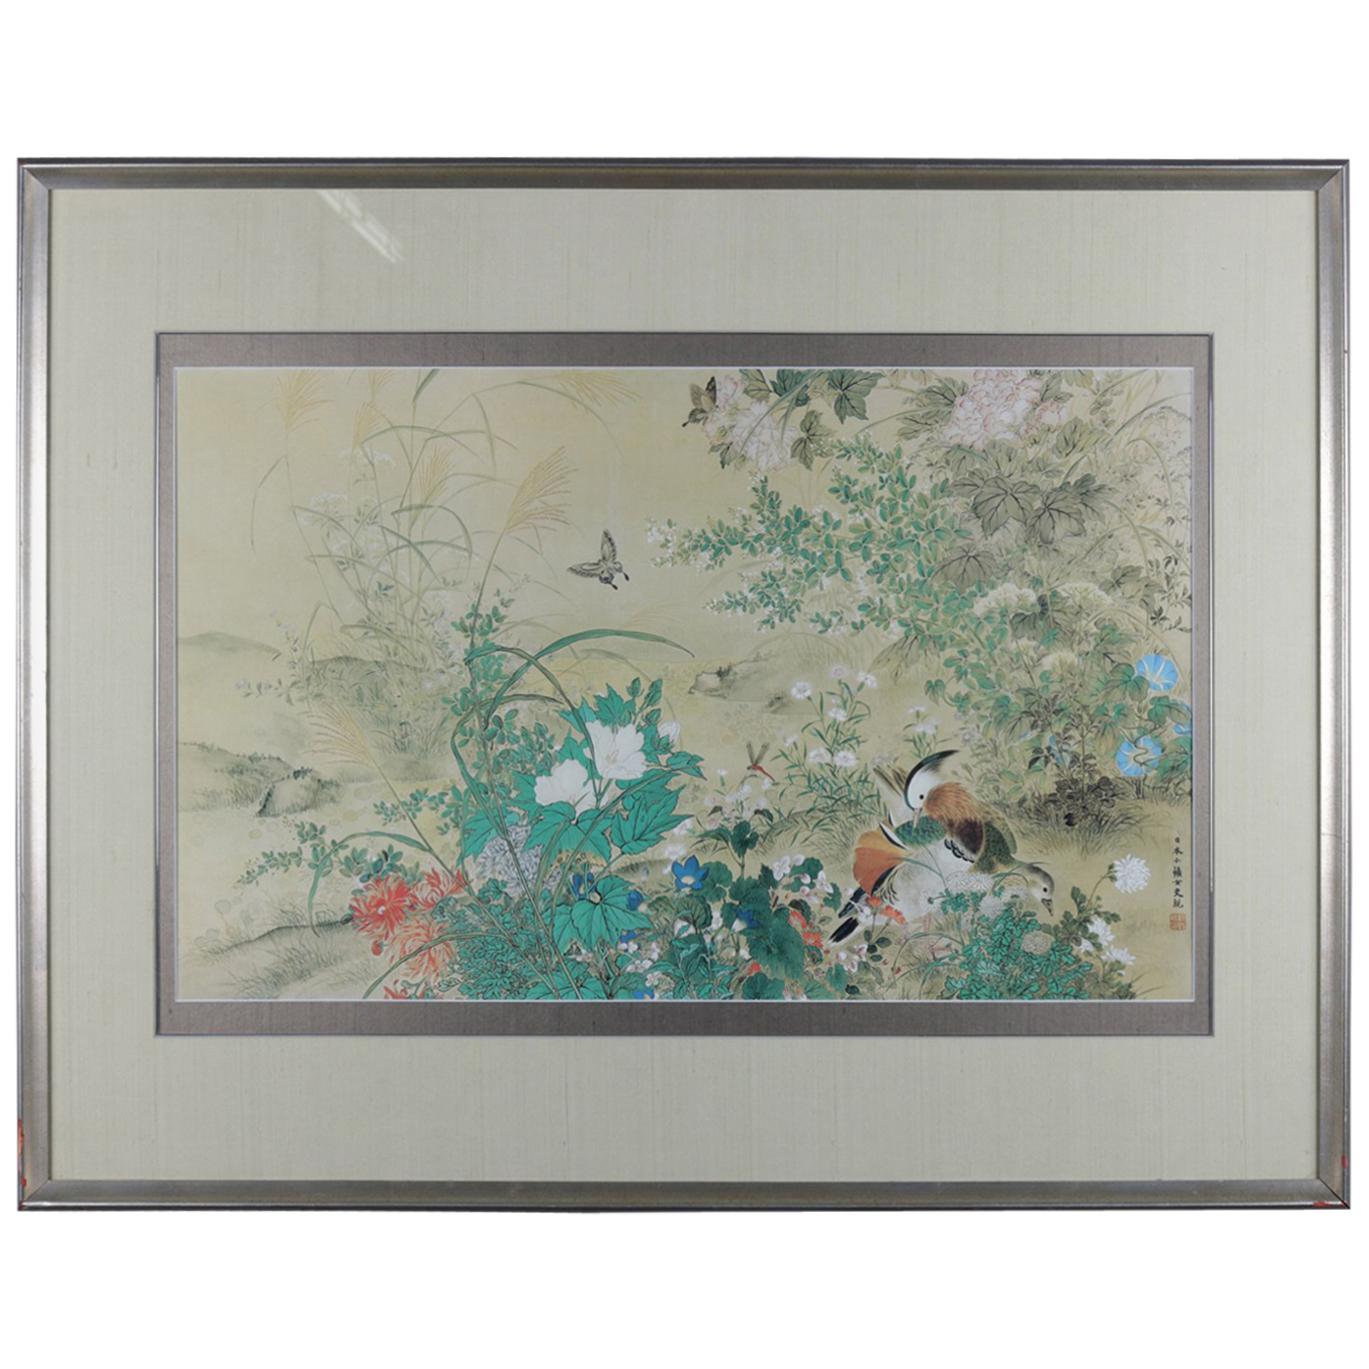 Vintage Asian Woodblock Print of Garden with Birds, Chop Mark Signed, circa 1940